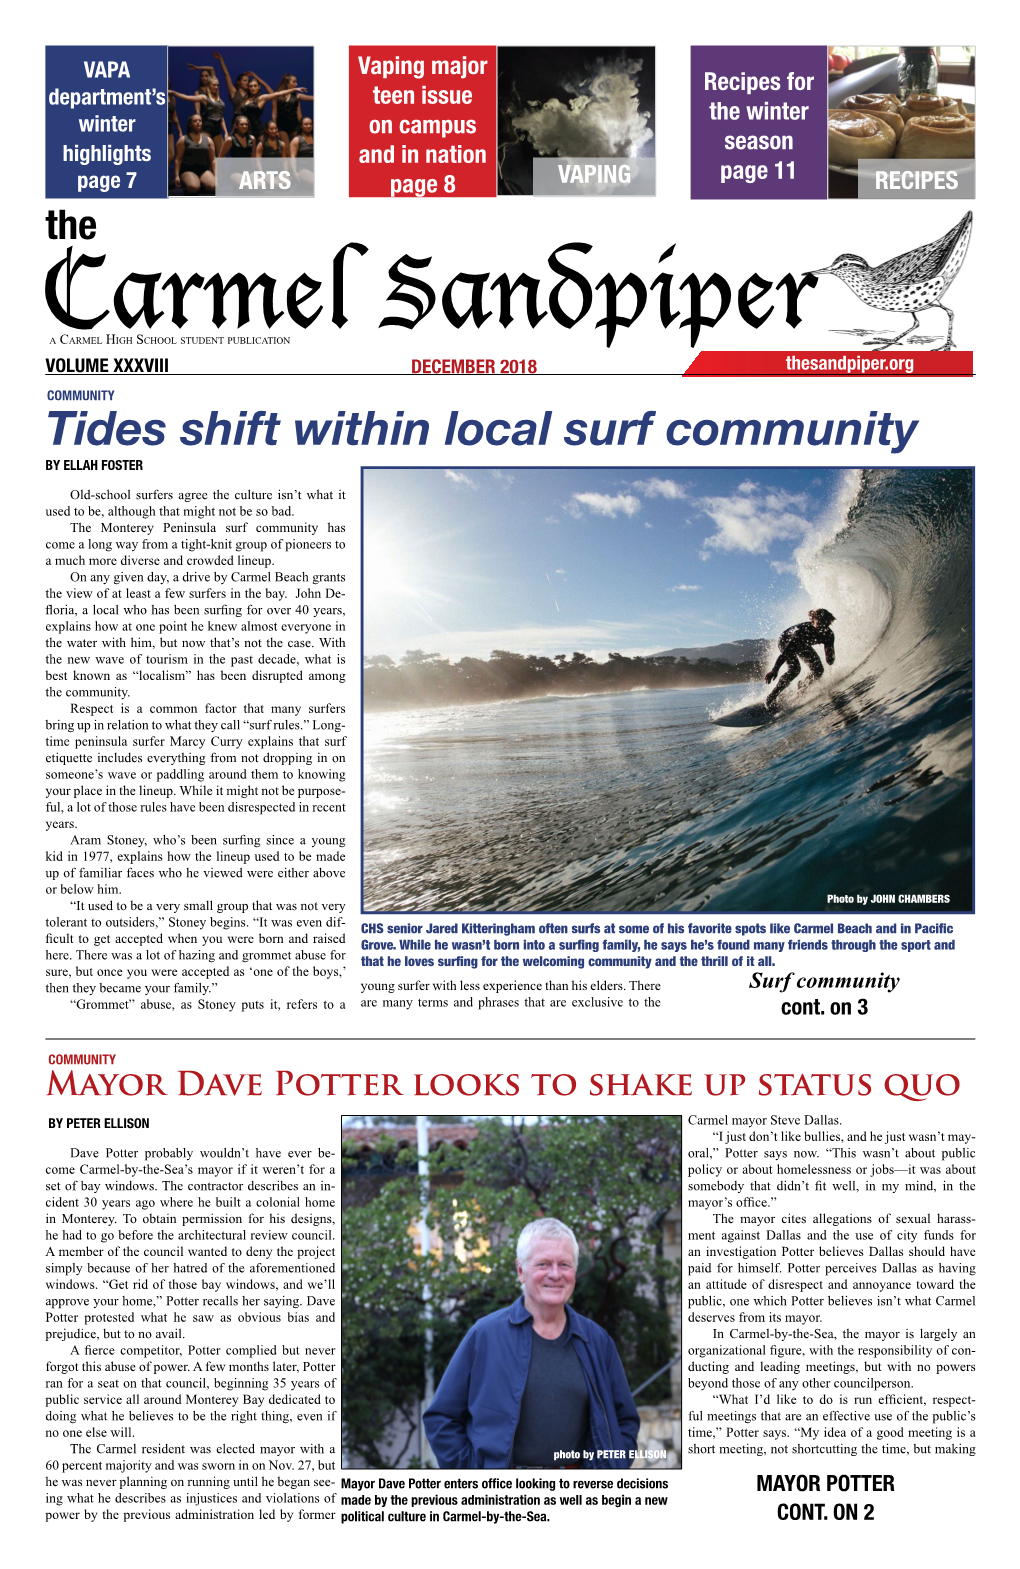 Tides Shift Within Local Surf Community by ELLAH FOSTER